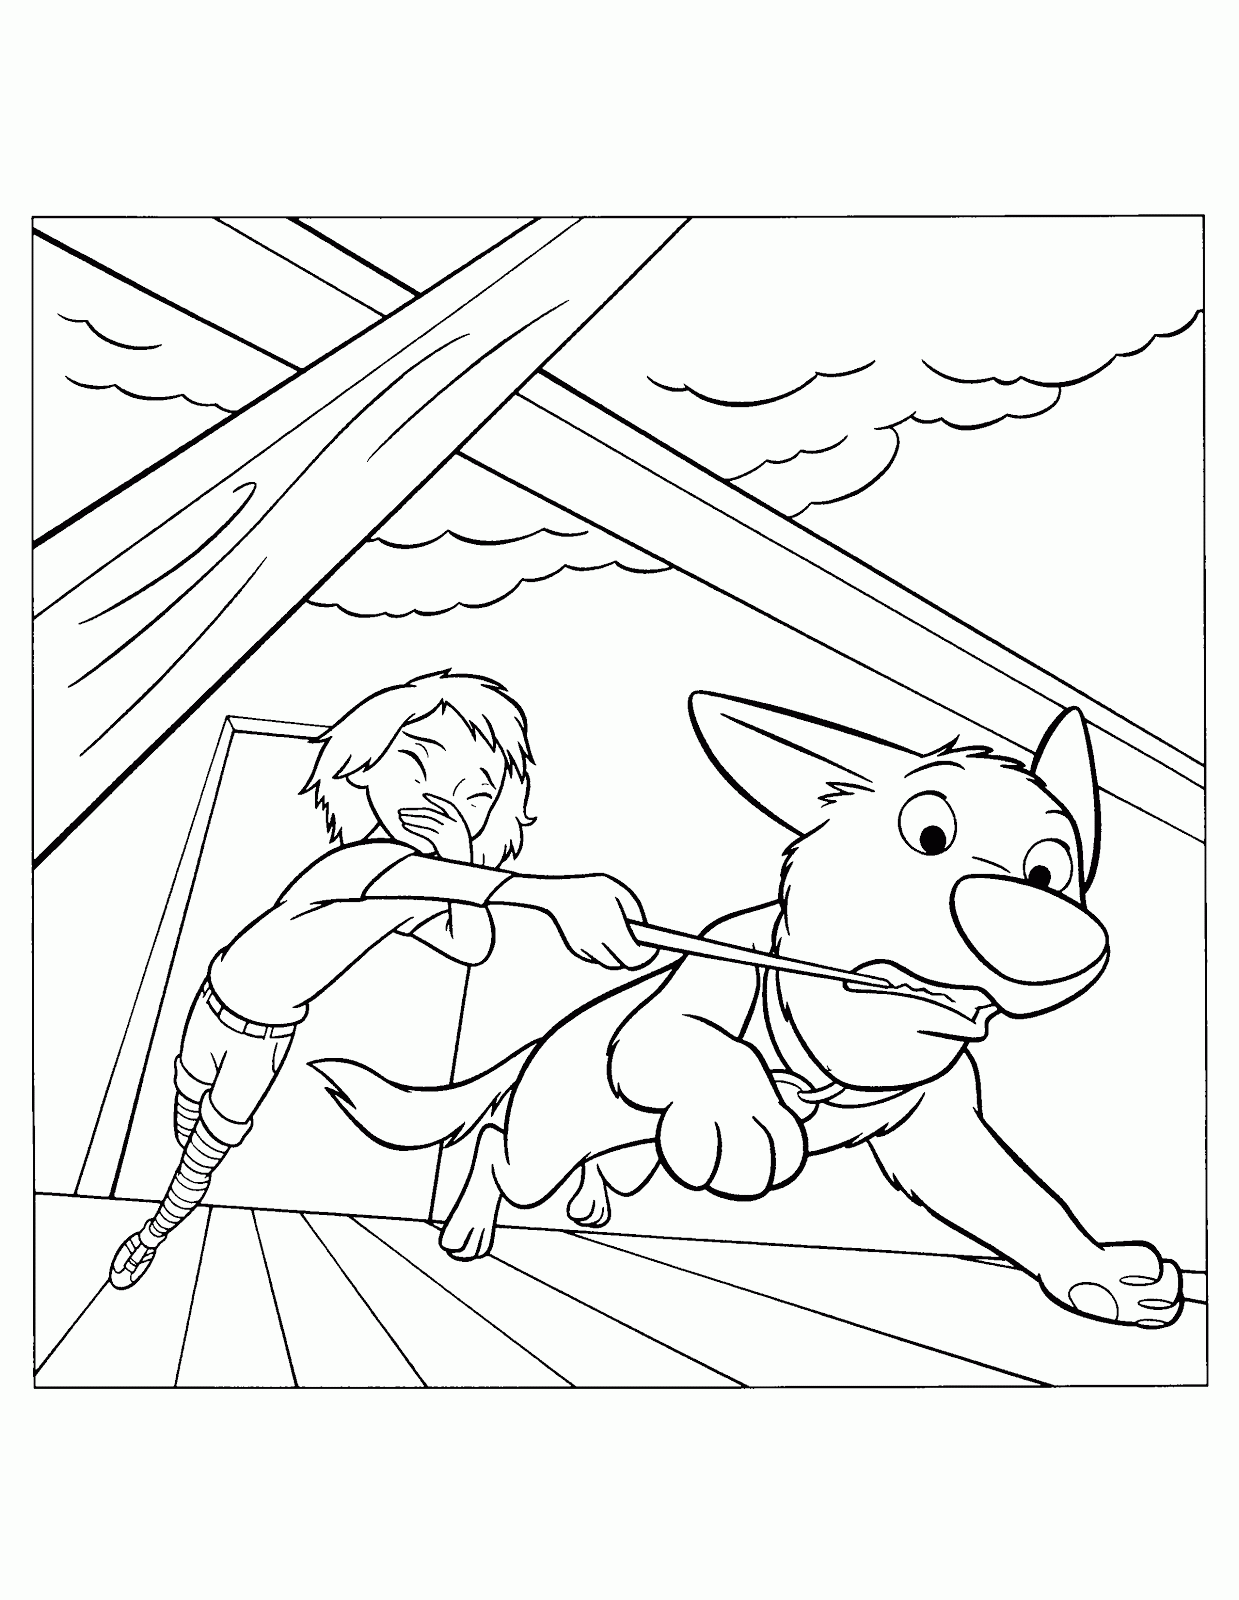 Here you can find lots of free Disney Coloring Pages that you can easily print out and give it to your kids Just click on the Bolt Coloring Pages that you